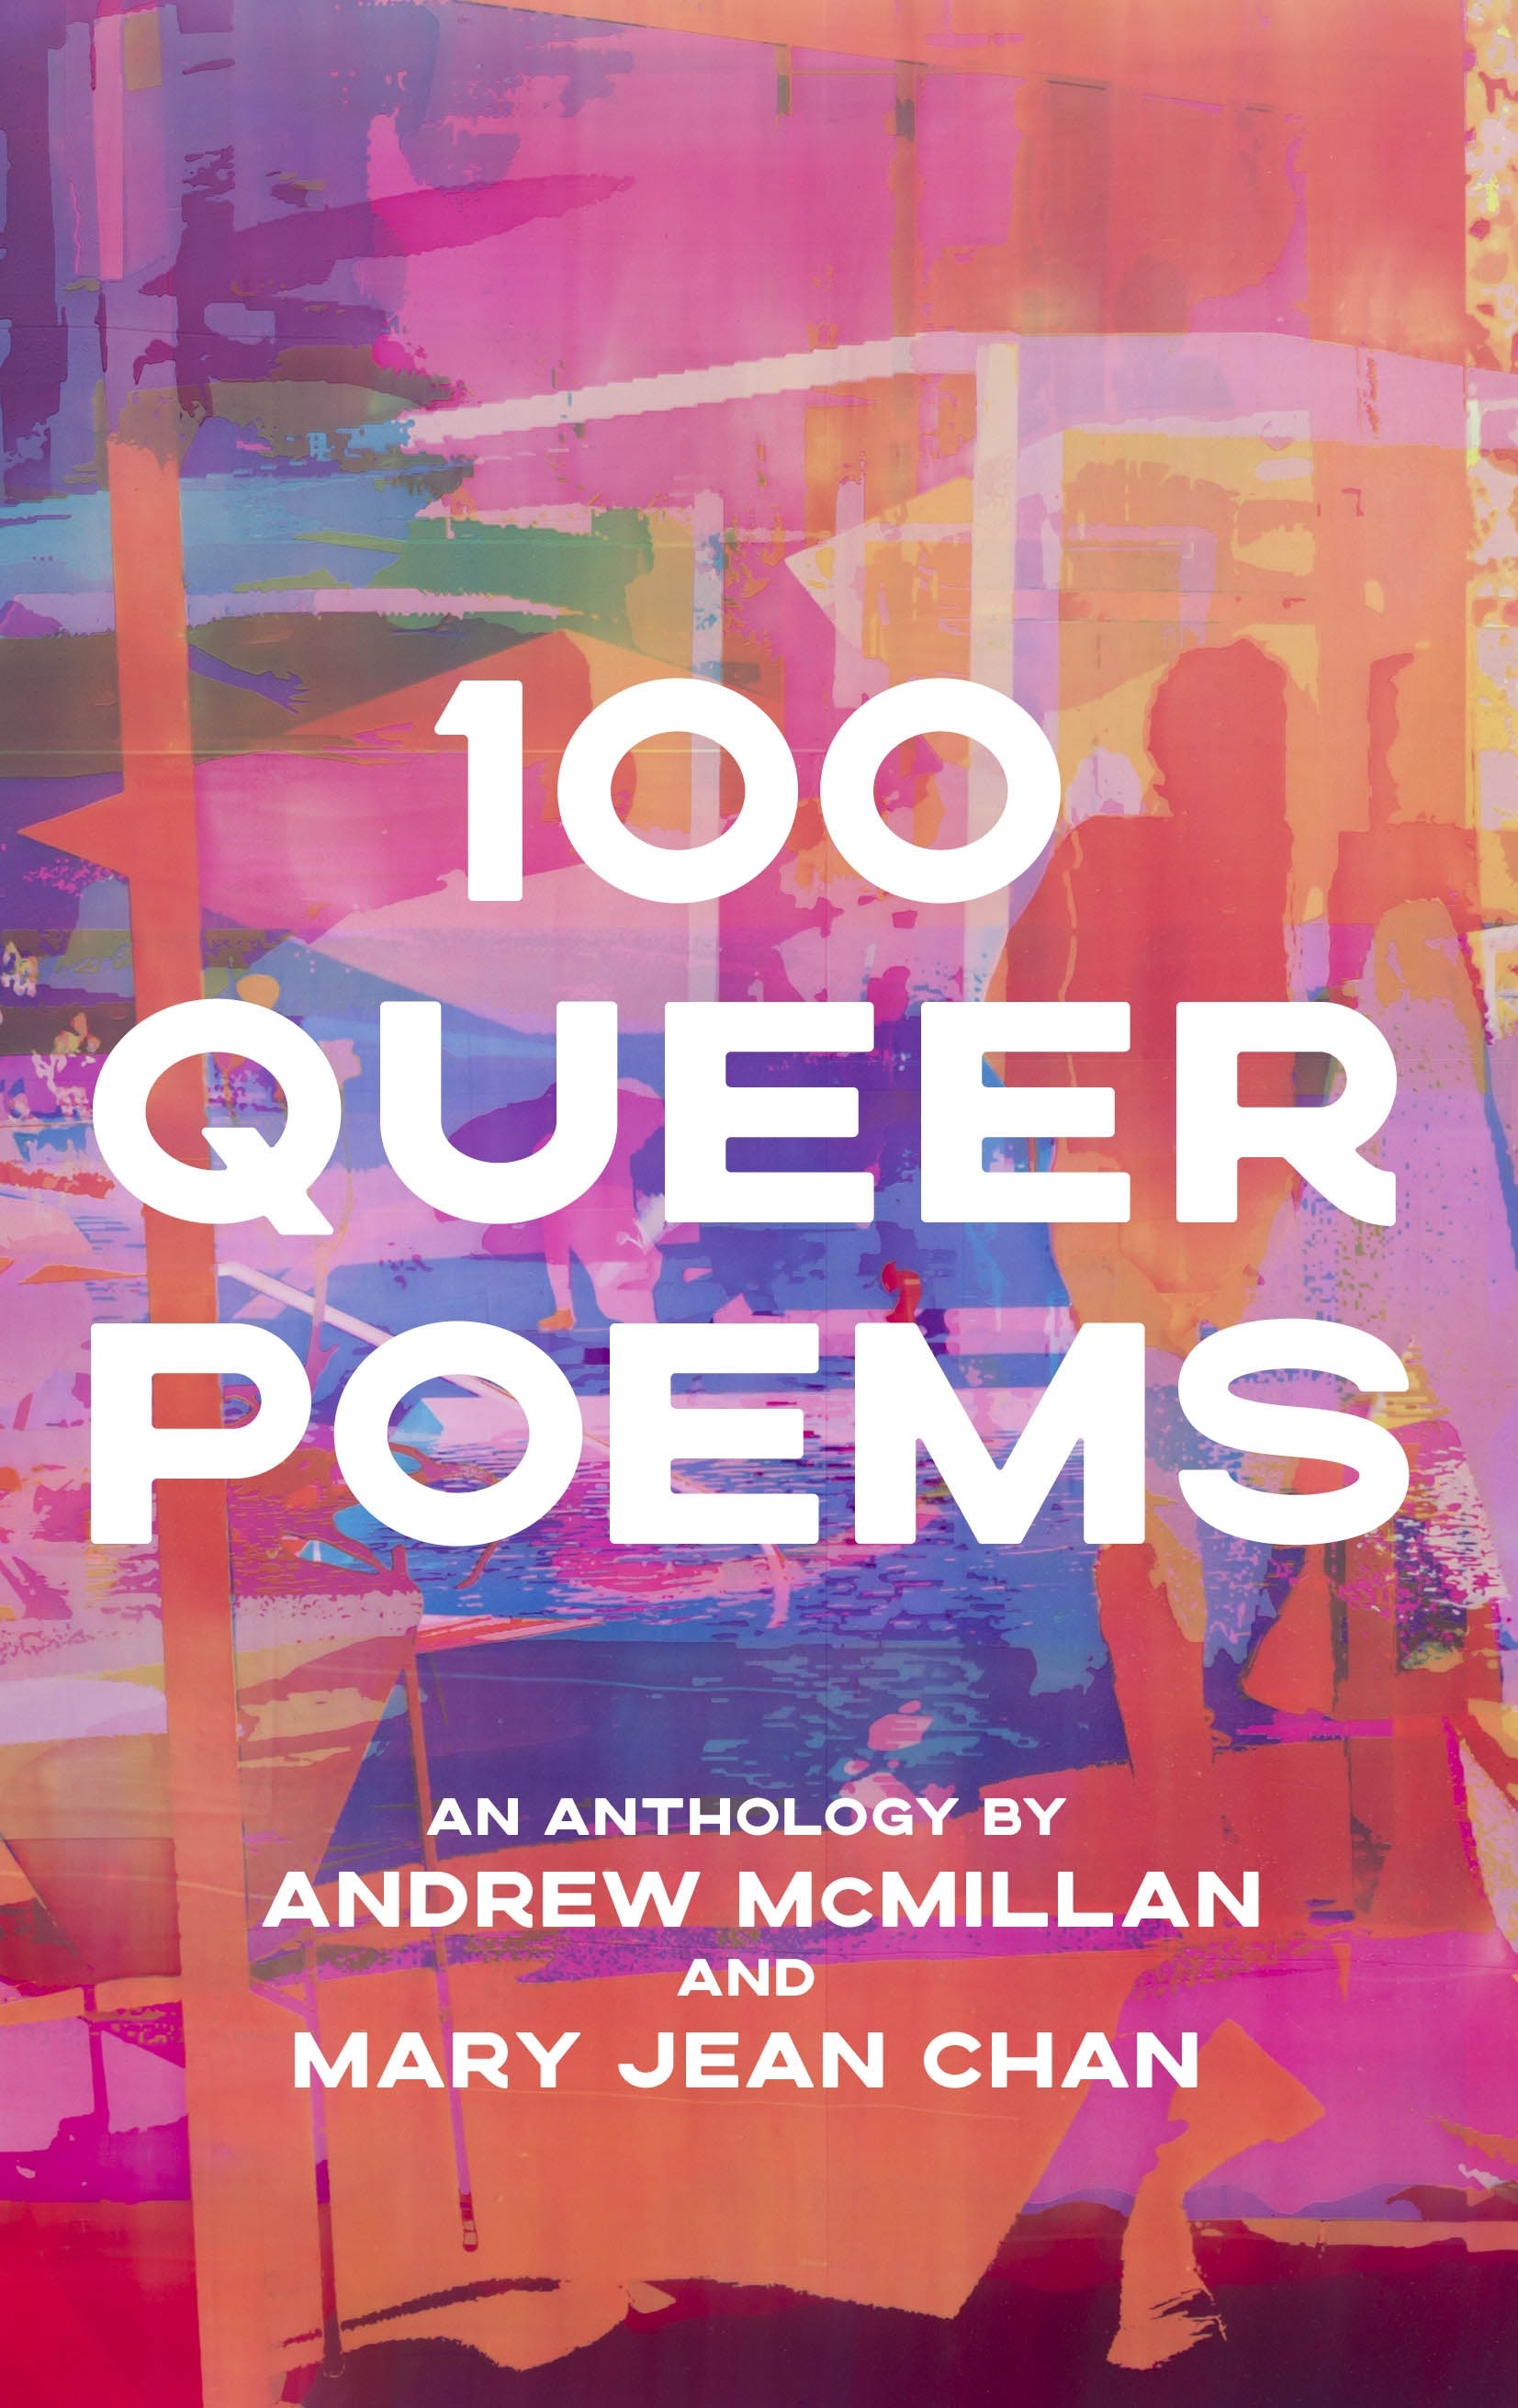 Book “100 Queer Poems” by Andrew McMillan, Mary Jean Chan — June 2, 2022